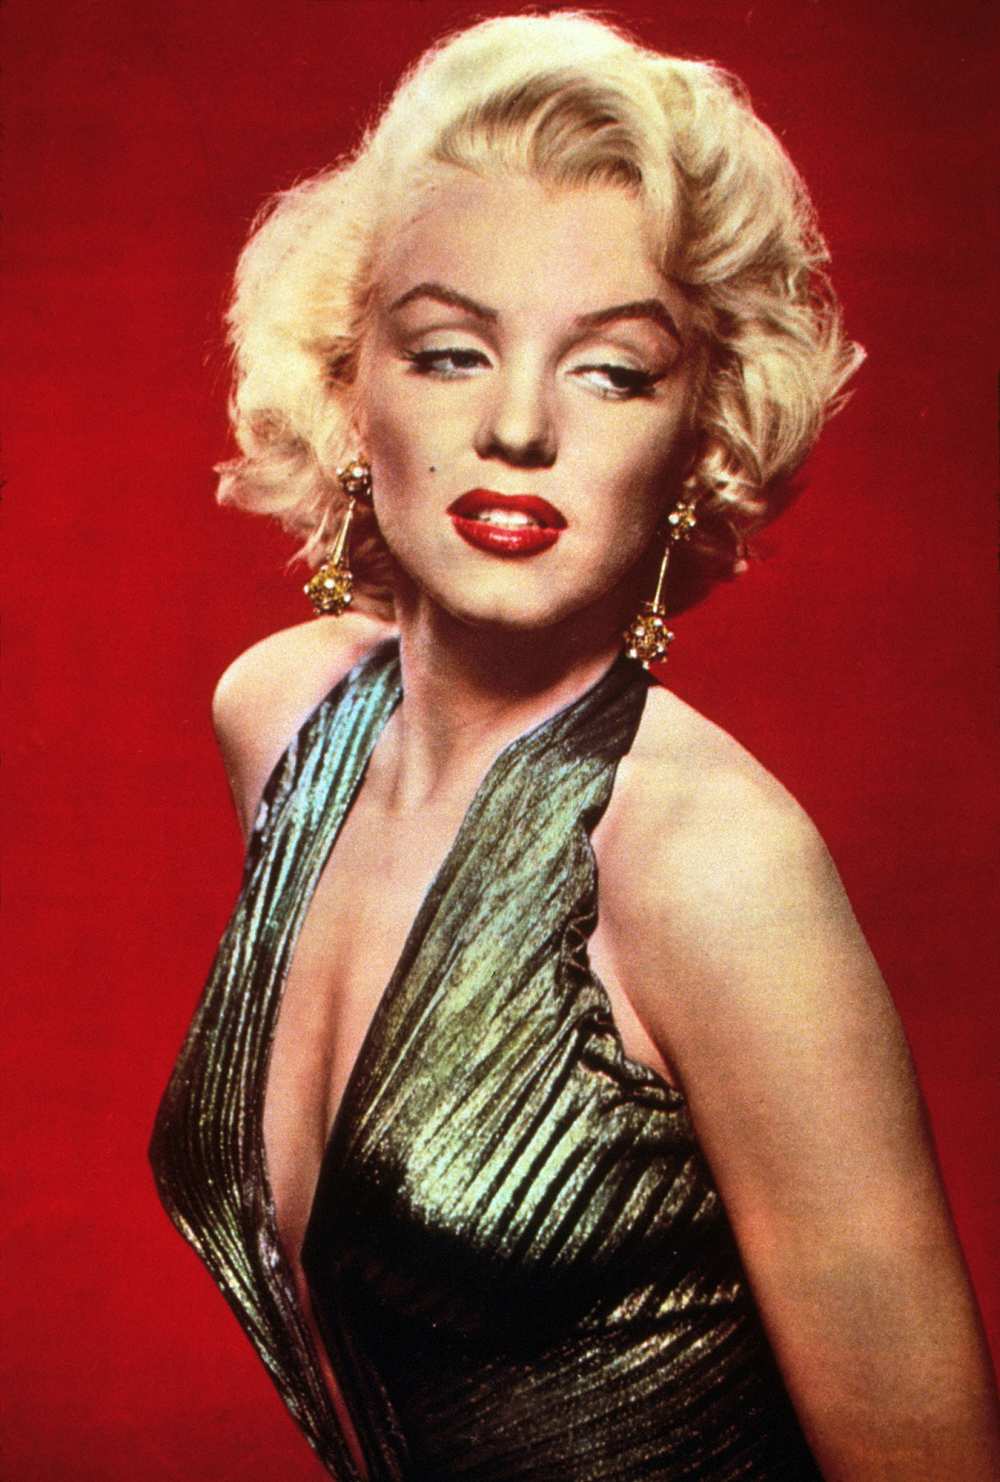 Did Marilyn Monroe's body go missing for 10 hours on the day she